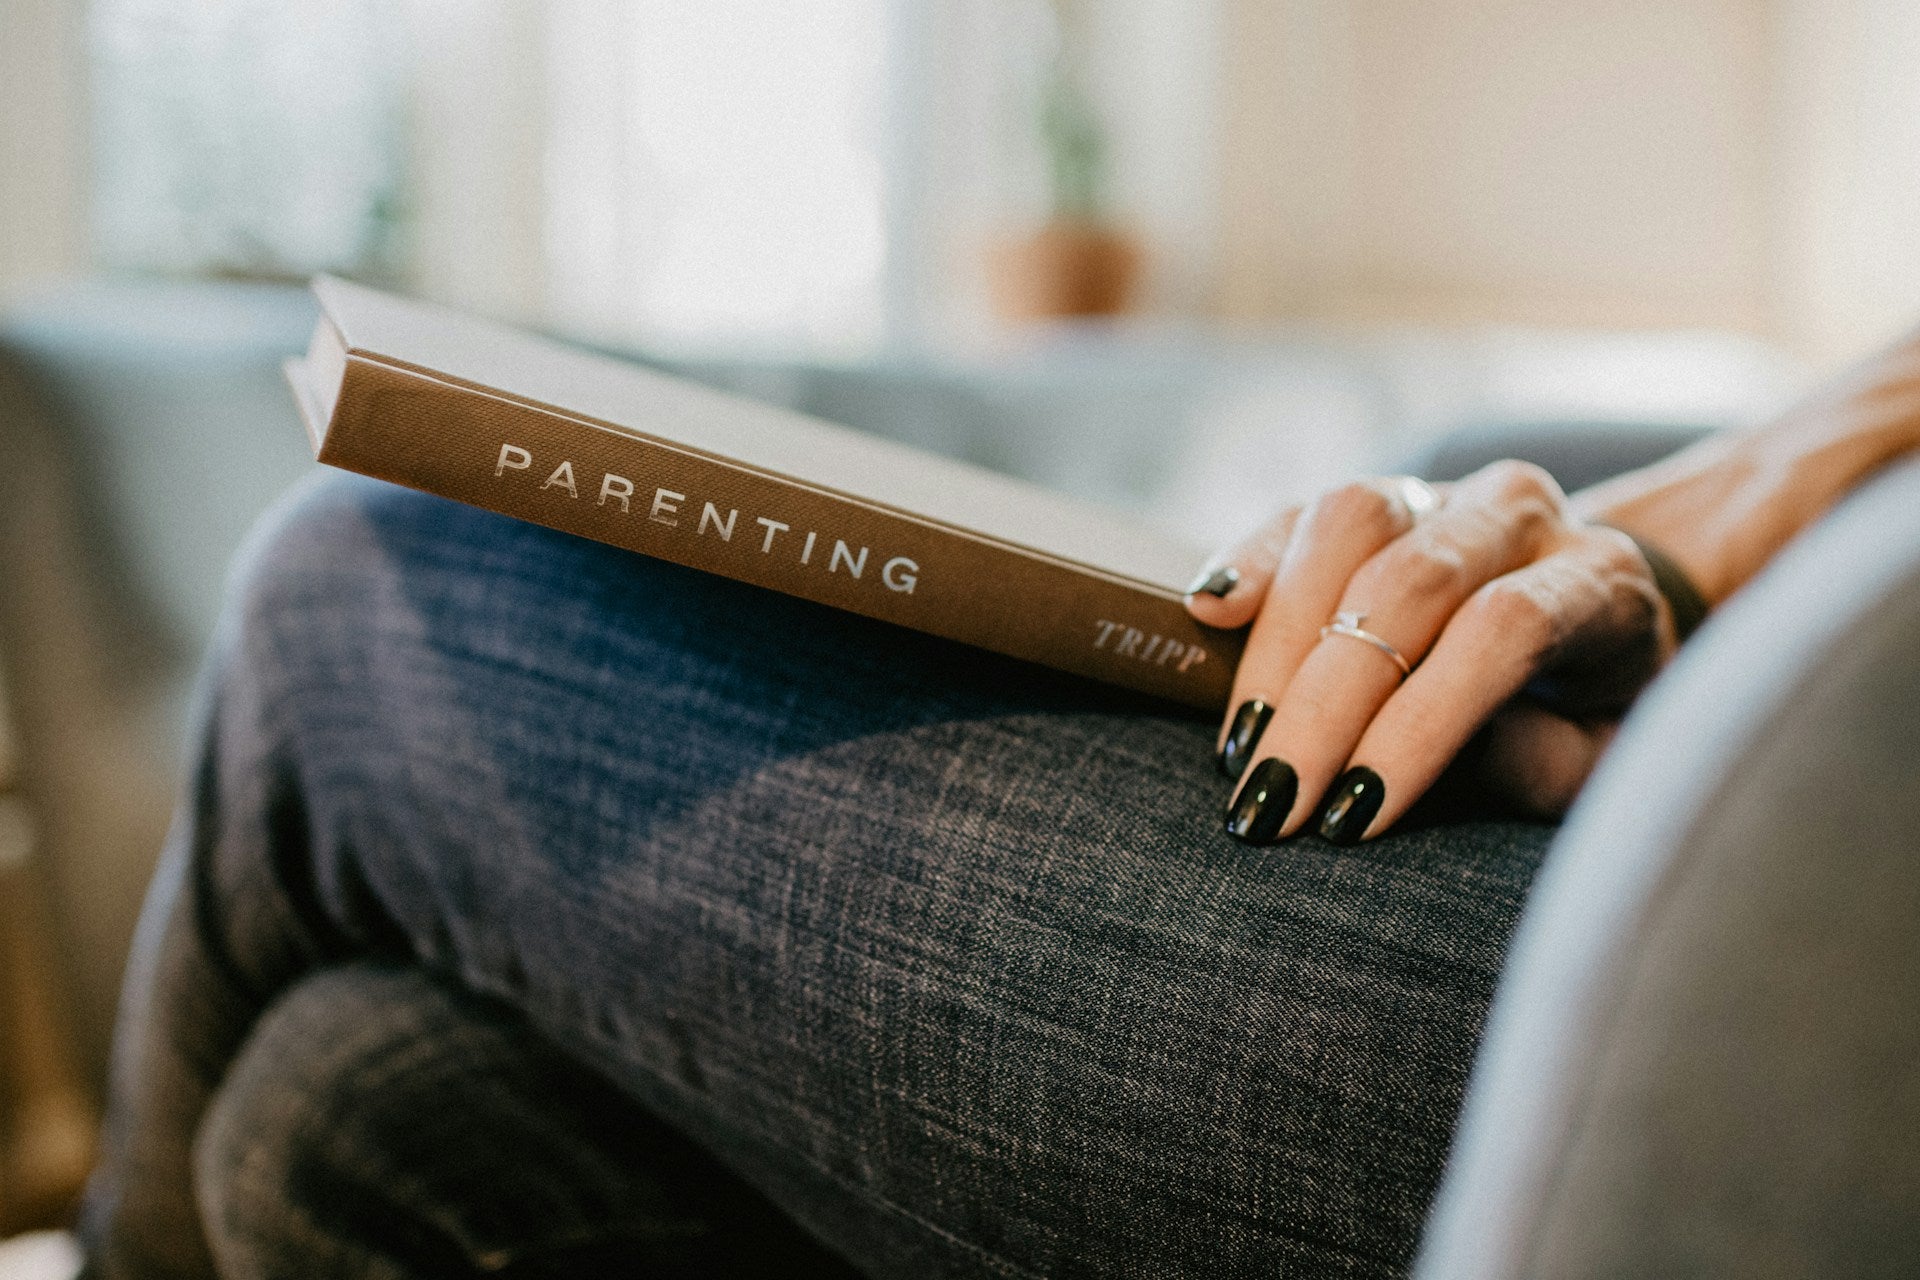 Women holding a parenting book on her lap